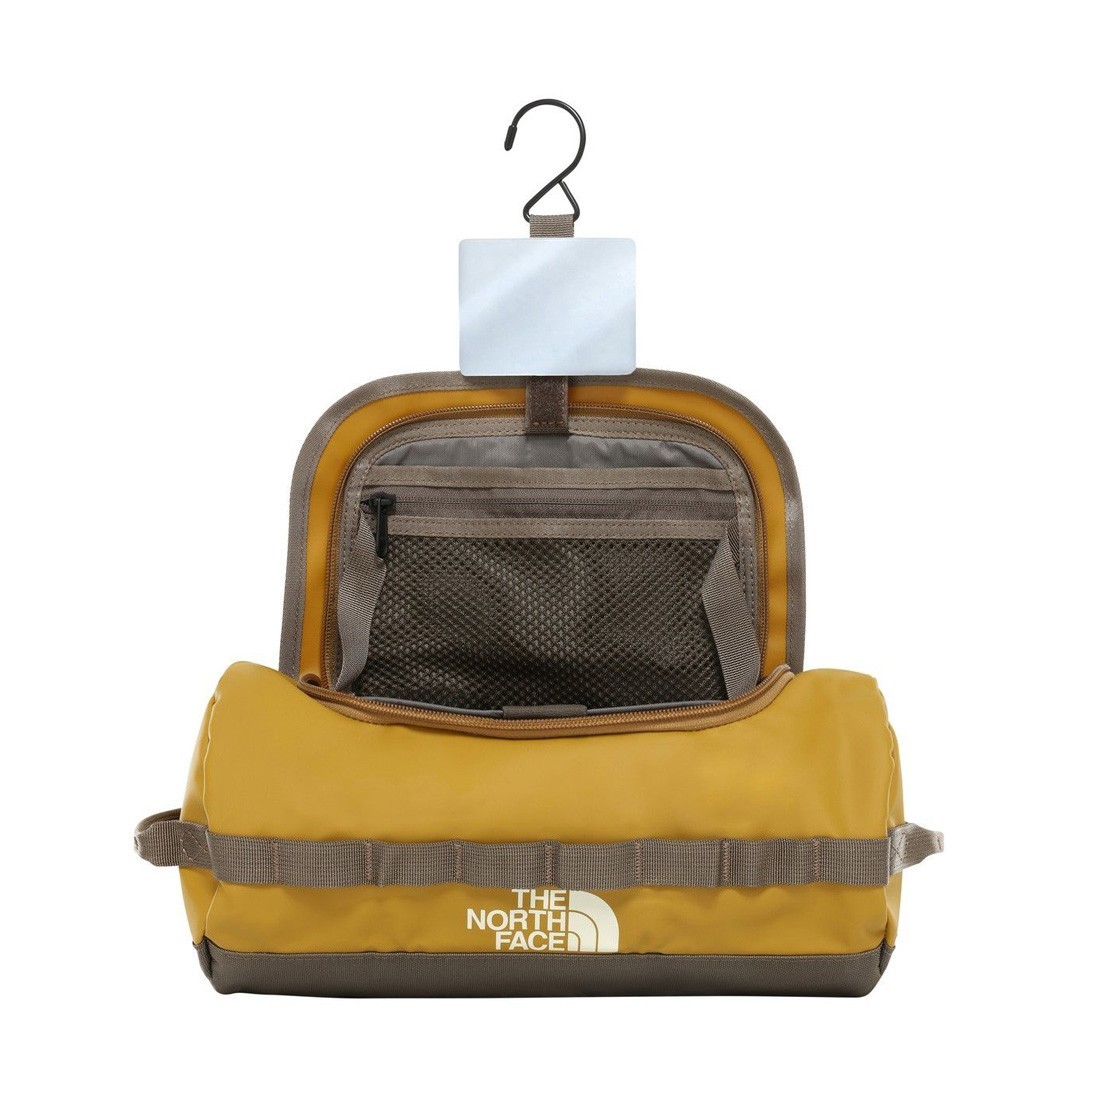 Armchair Literature index finger Shop Beauty Case The North Face BC Travel Canister British - Khaki - The  North Face, delivered to your home | TheOutfit